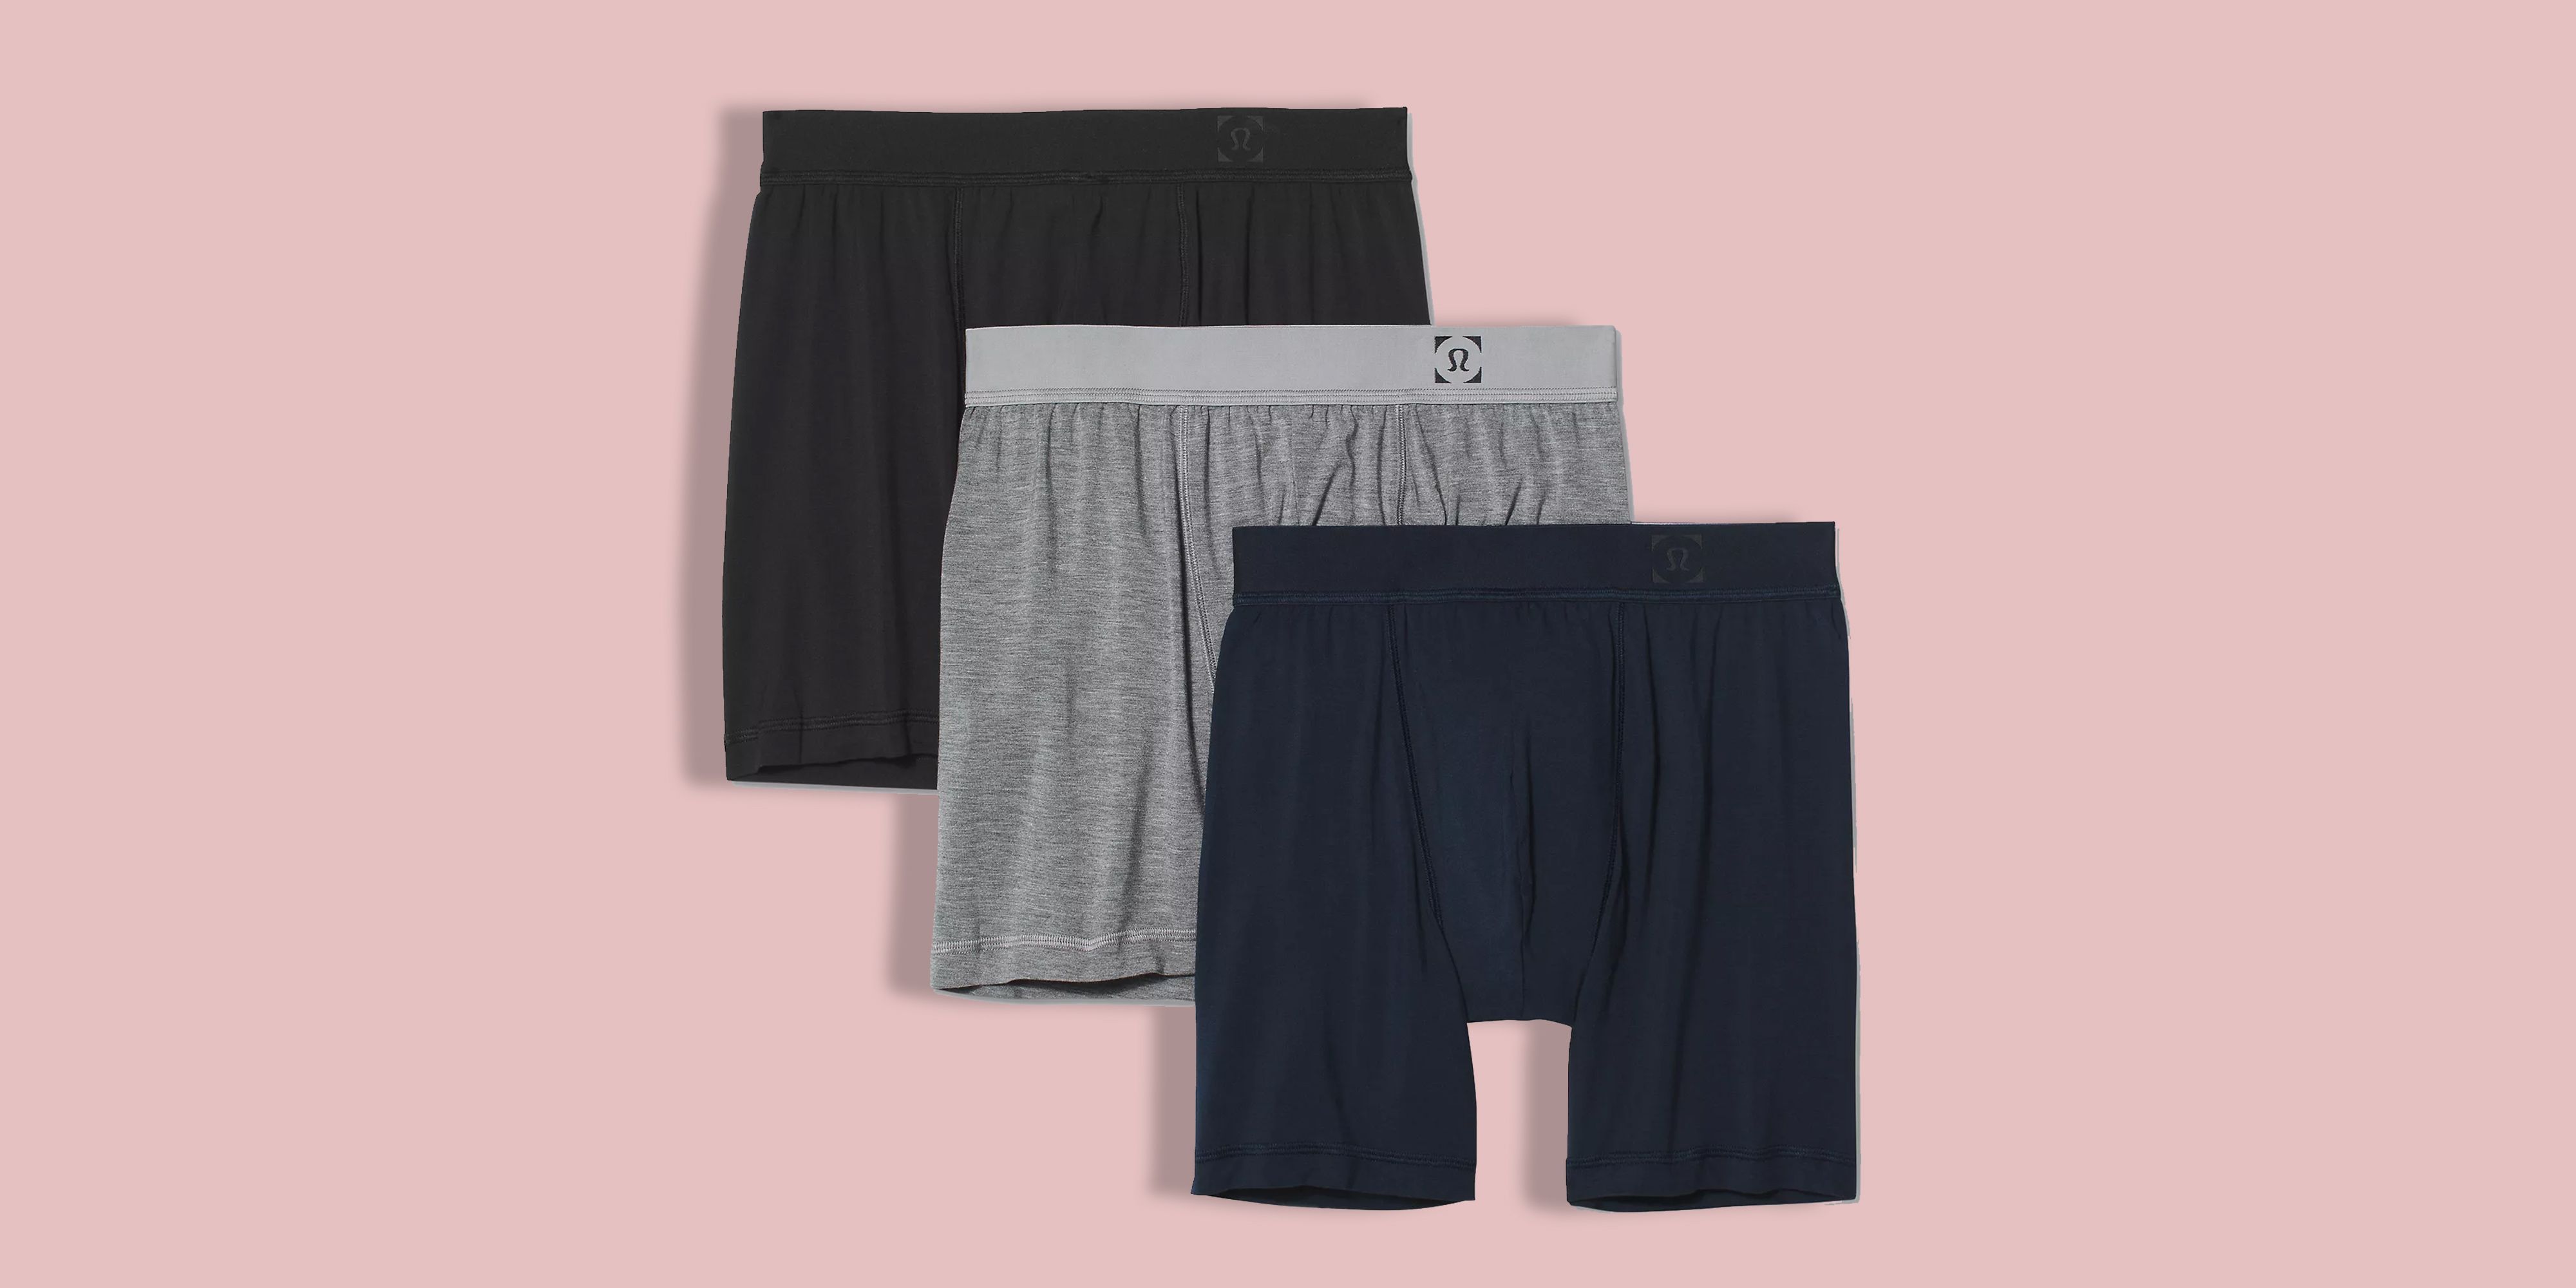 19 Best Men's Boxer Shorts for 2023 - Boxers to Wear Every Day